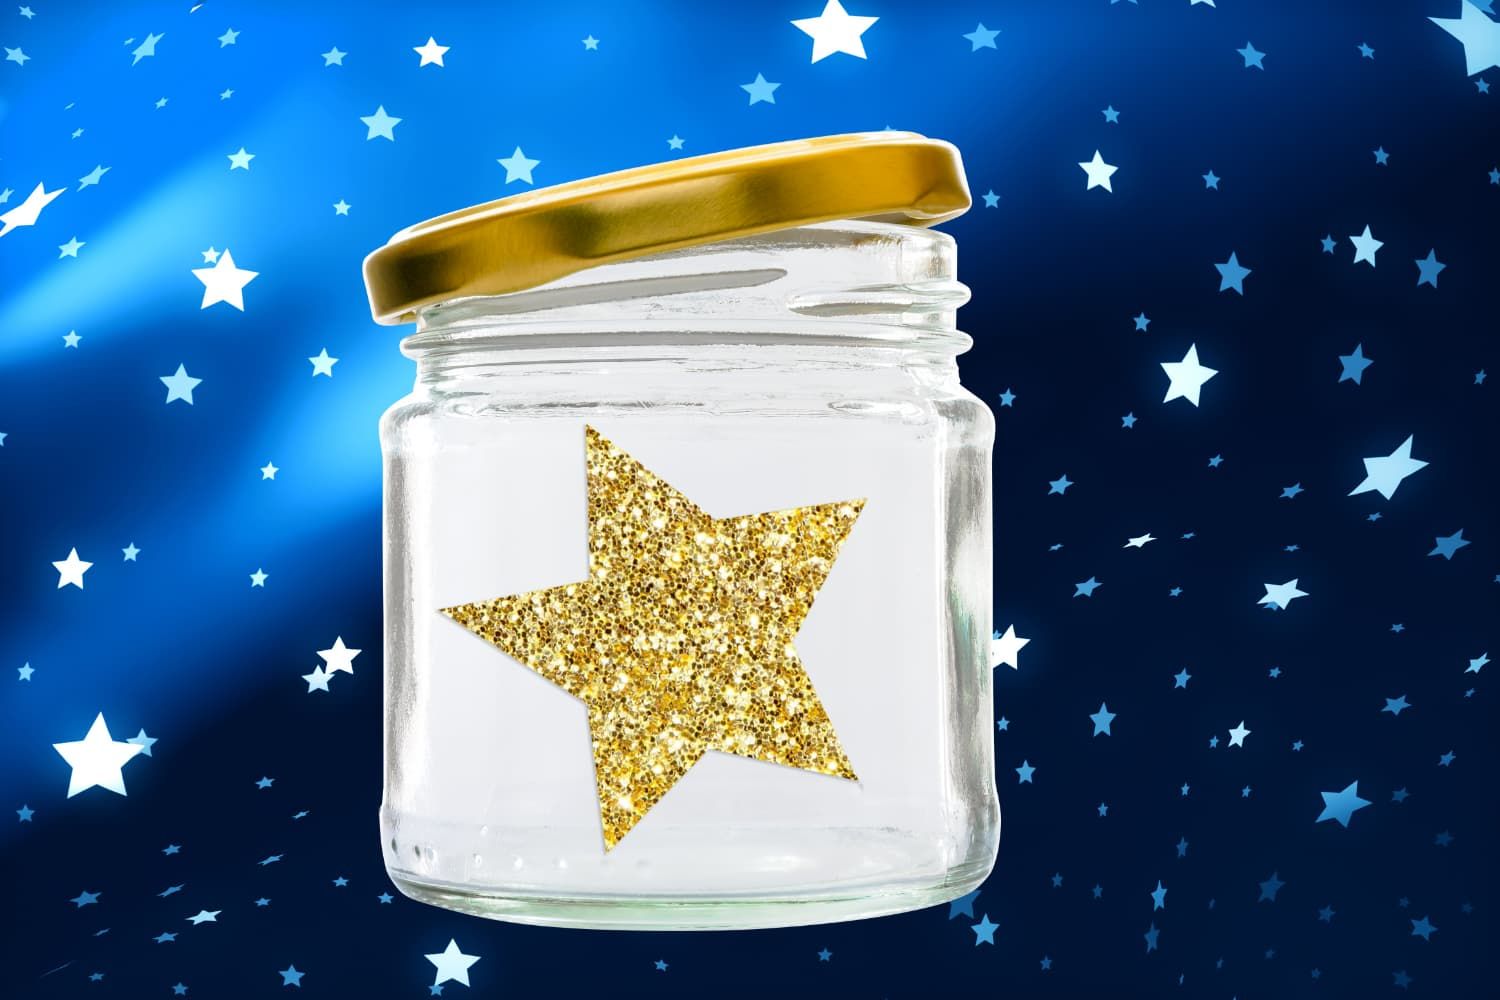 Object%20lesson%20-%20Stars%20in%20a%20jar-6132cbc5 Covenant